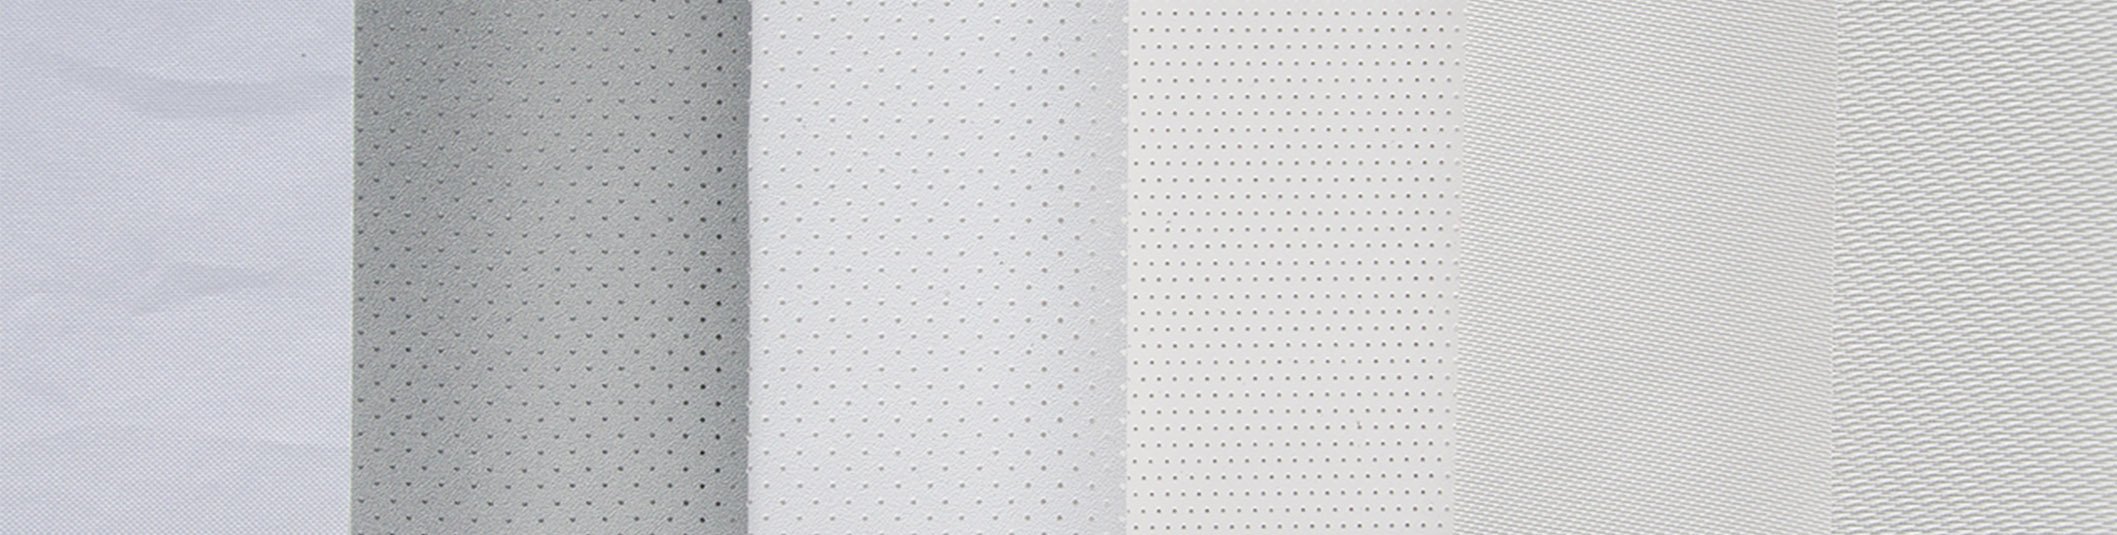 category-Best Acoustic Absorbing Fabric Acoustically Transparent Fabrics-XY Screens-img-1